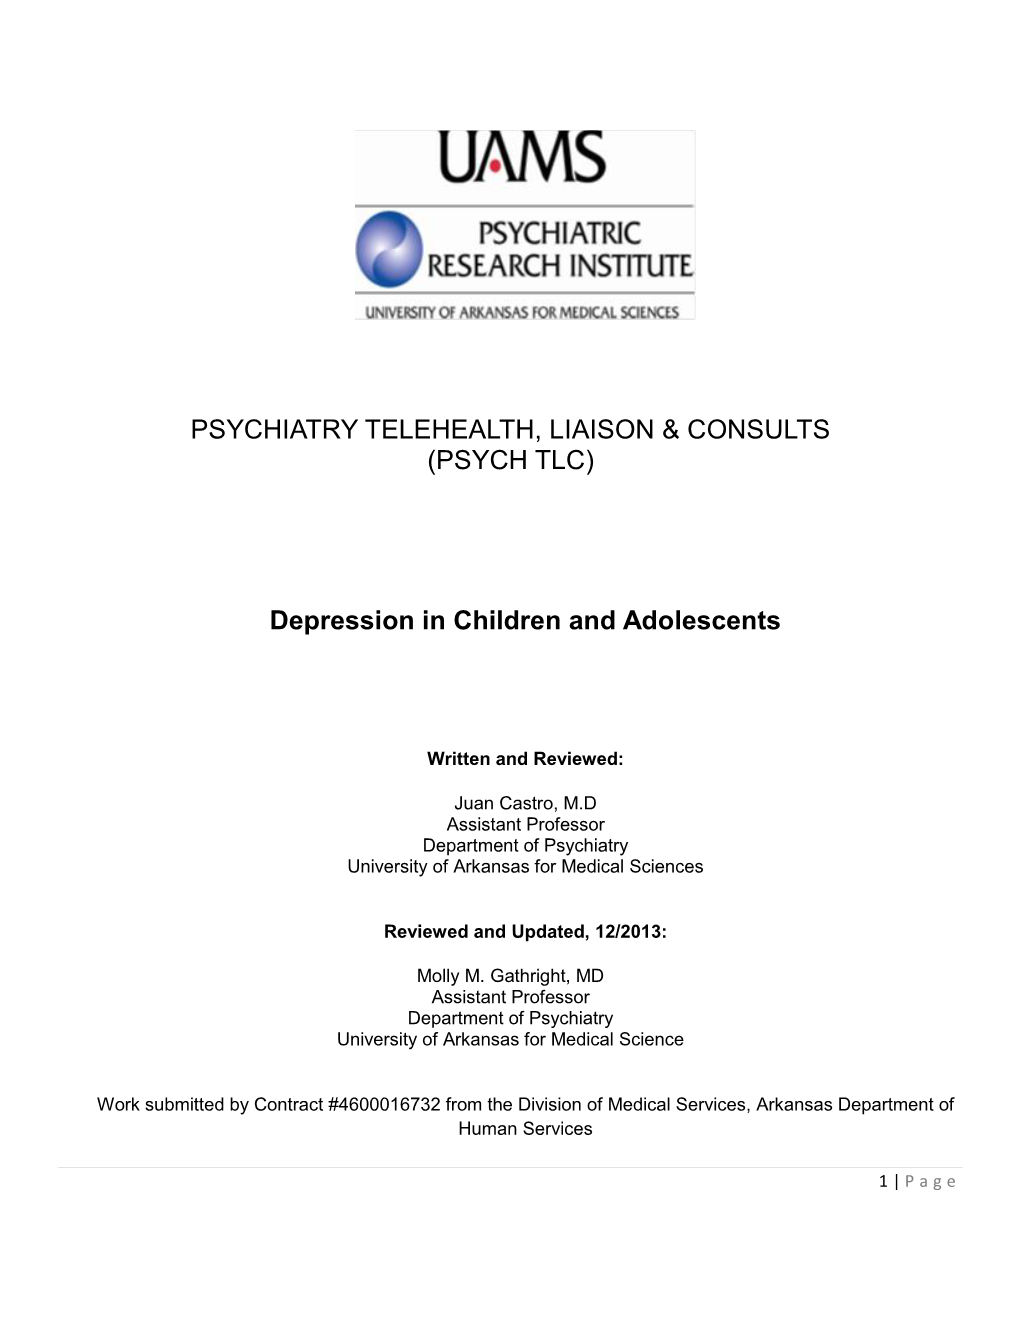 (PSYCH TLC) Depression in Children and Adolescents